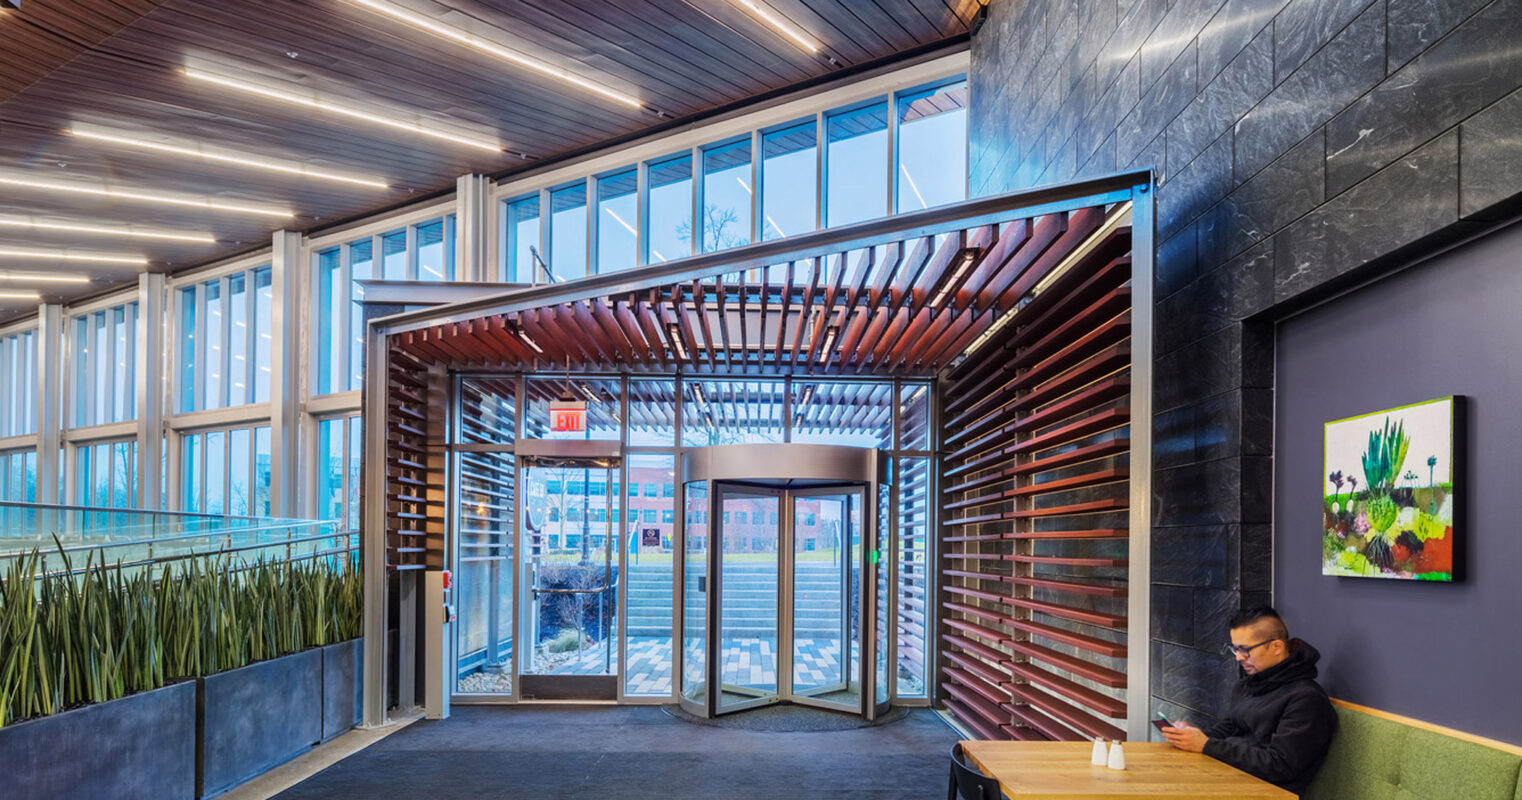 Modern commercial lobby featuring sleek wooden slats on the ceiling that lead to a luminous, glass-enclosed entrance, complementing the textured dark stone wall. Green upholstered bench seating adds a pop of color beside a vibrant wall art piece, while a patron works at a table nearby.